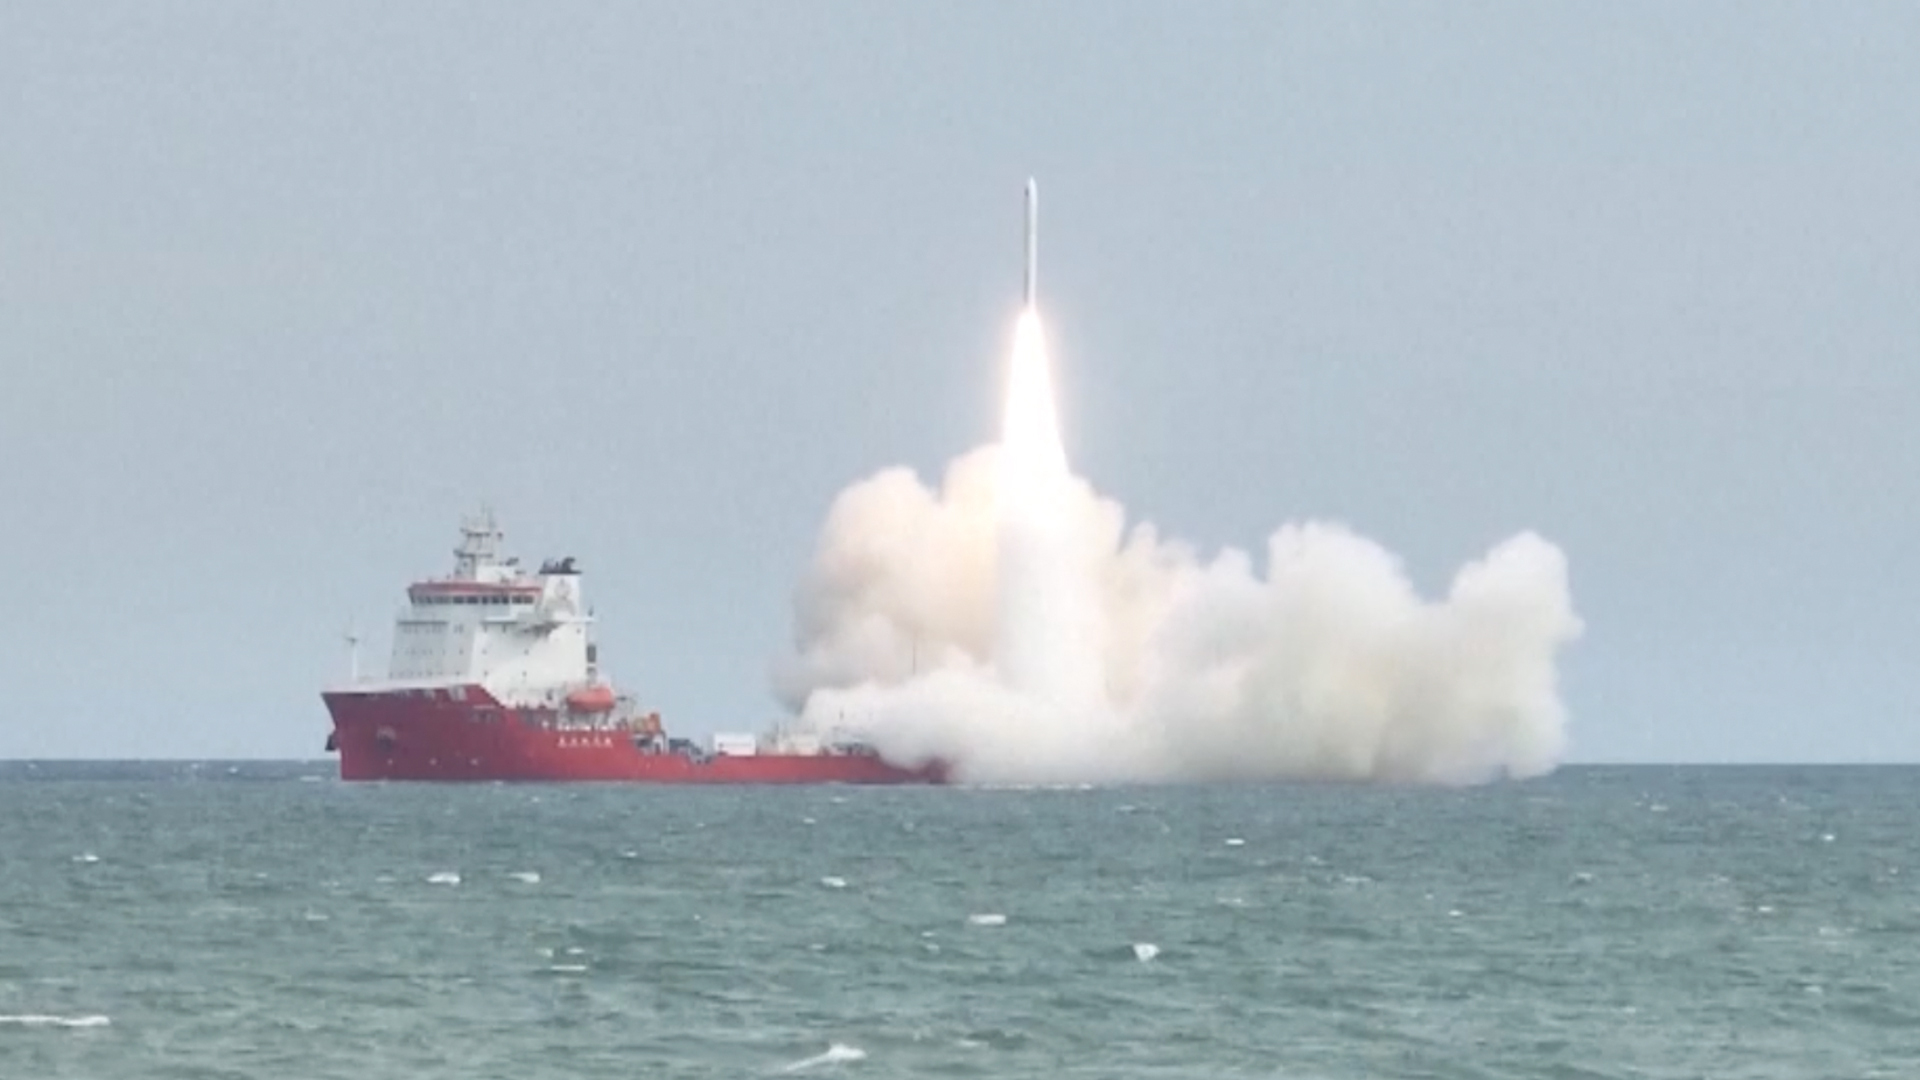 Watch Chinese company launch 4 satellites to orbit from ship at sea (video) Space